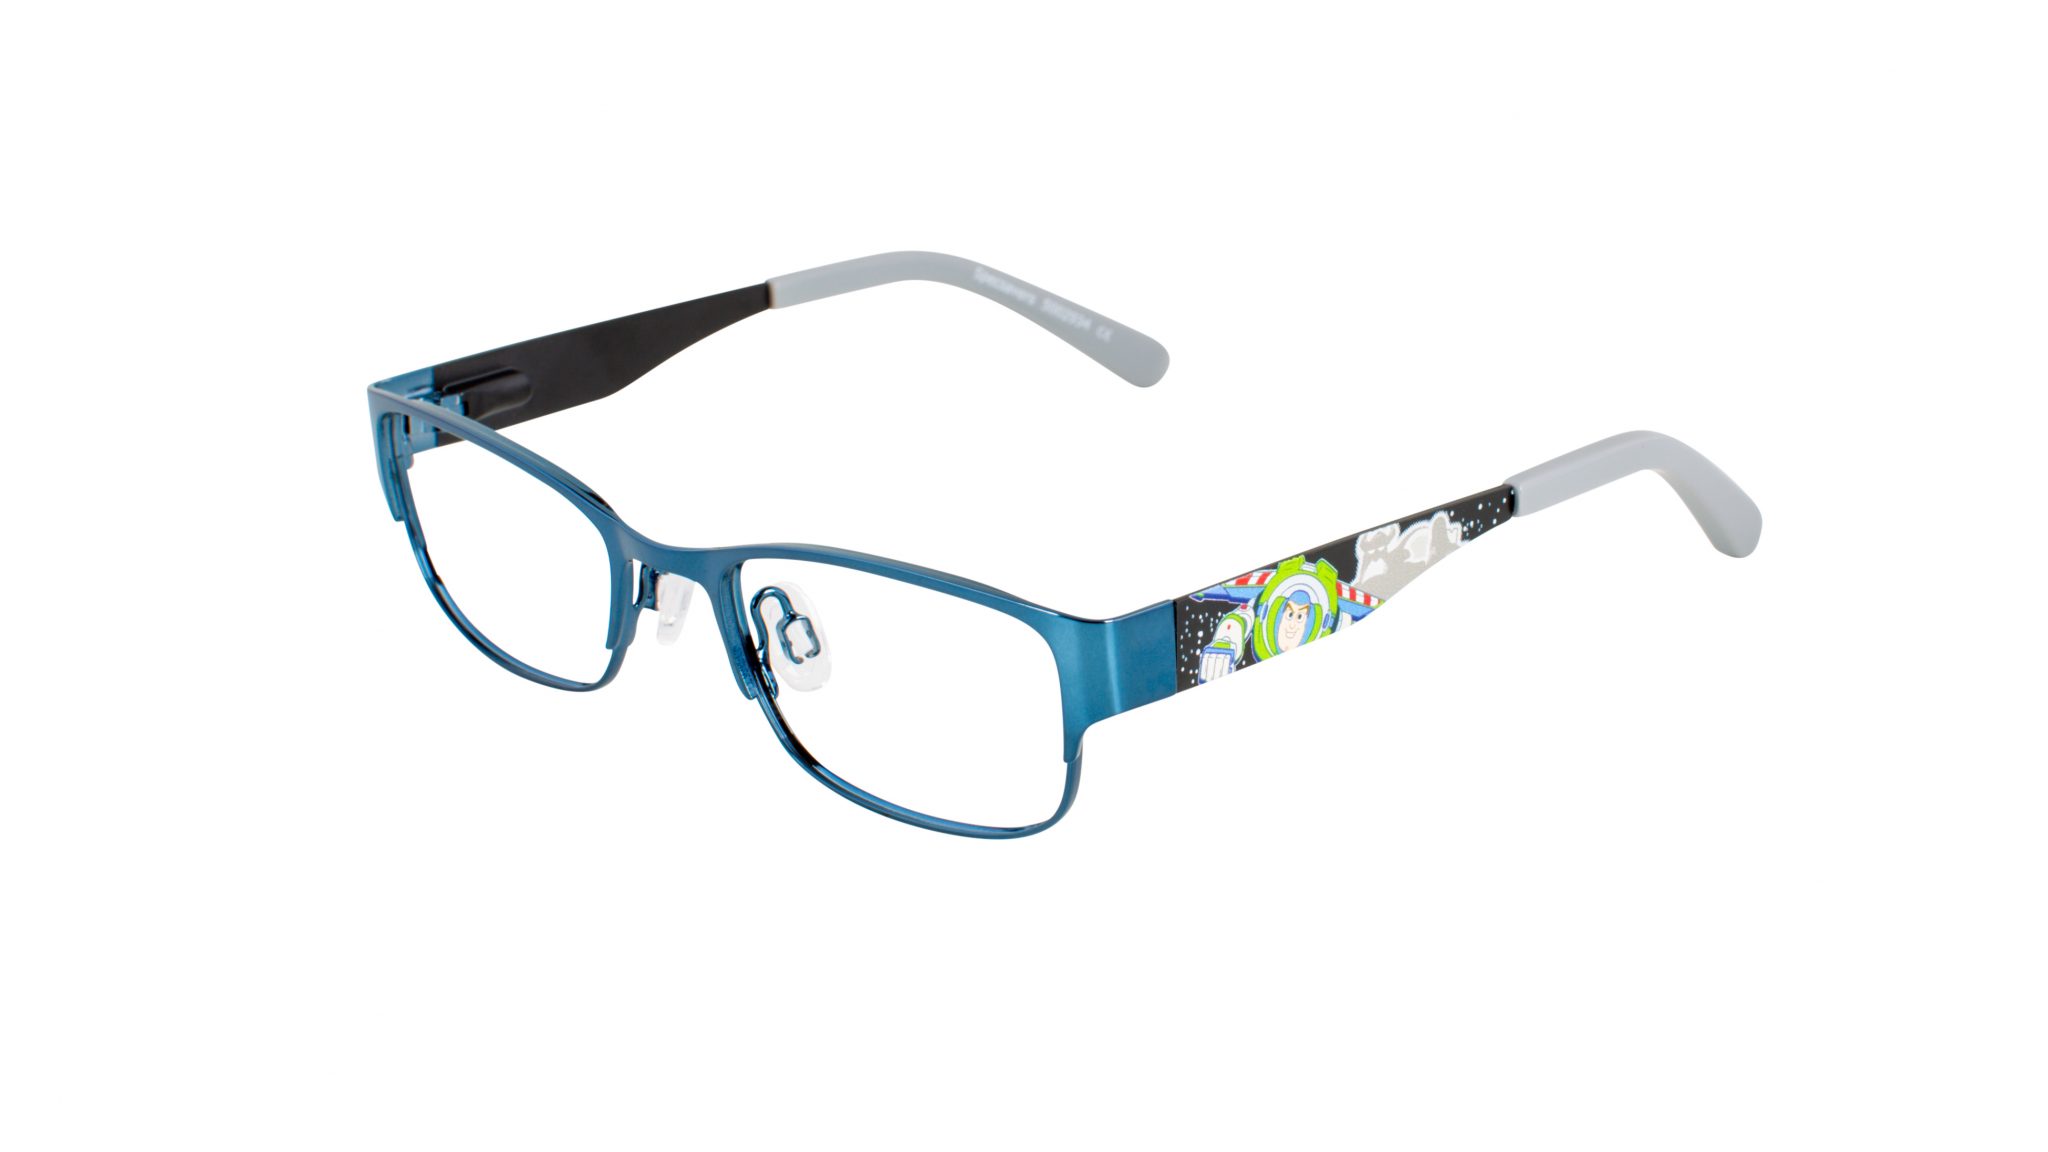 Specsavers are now stocking Toy Story 4 frames and the kids will love them